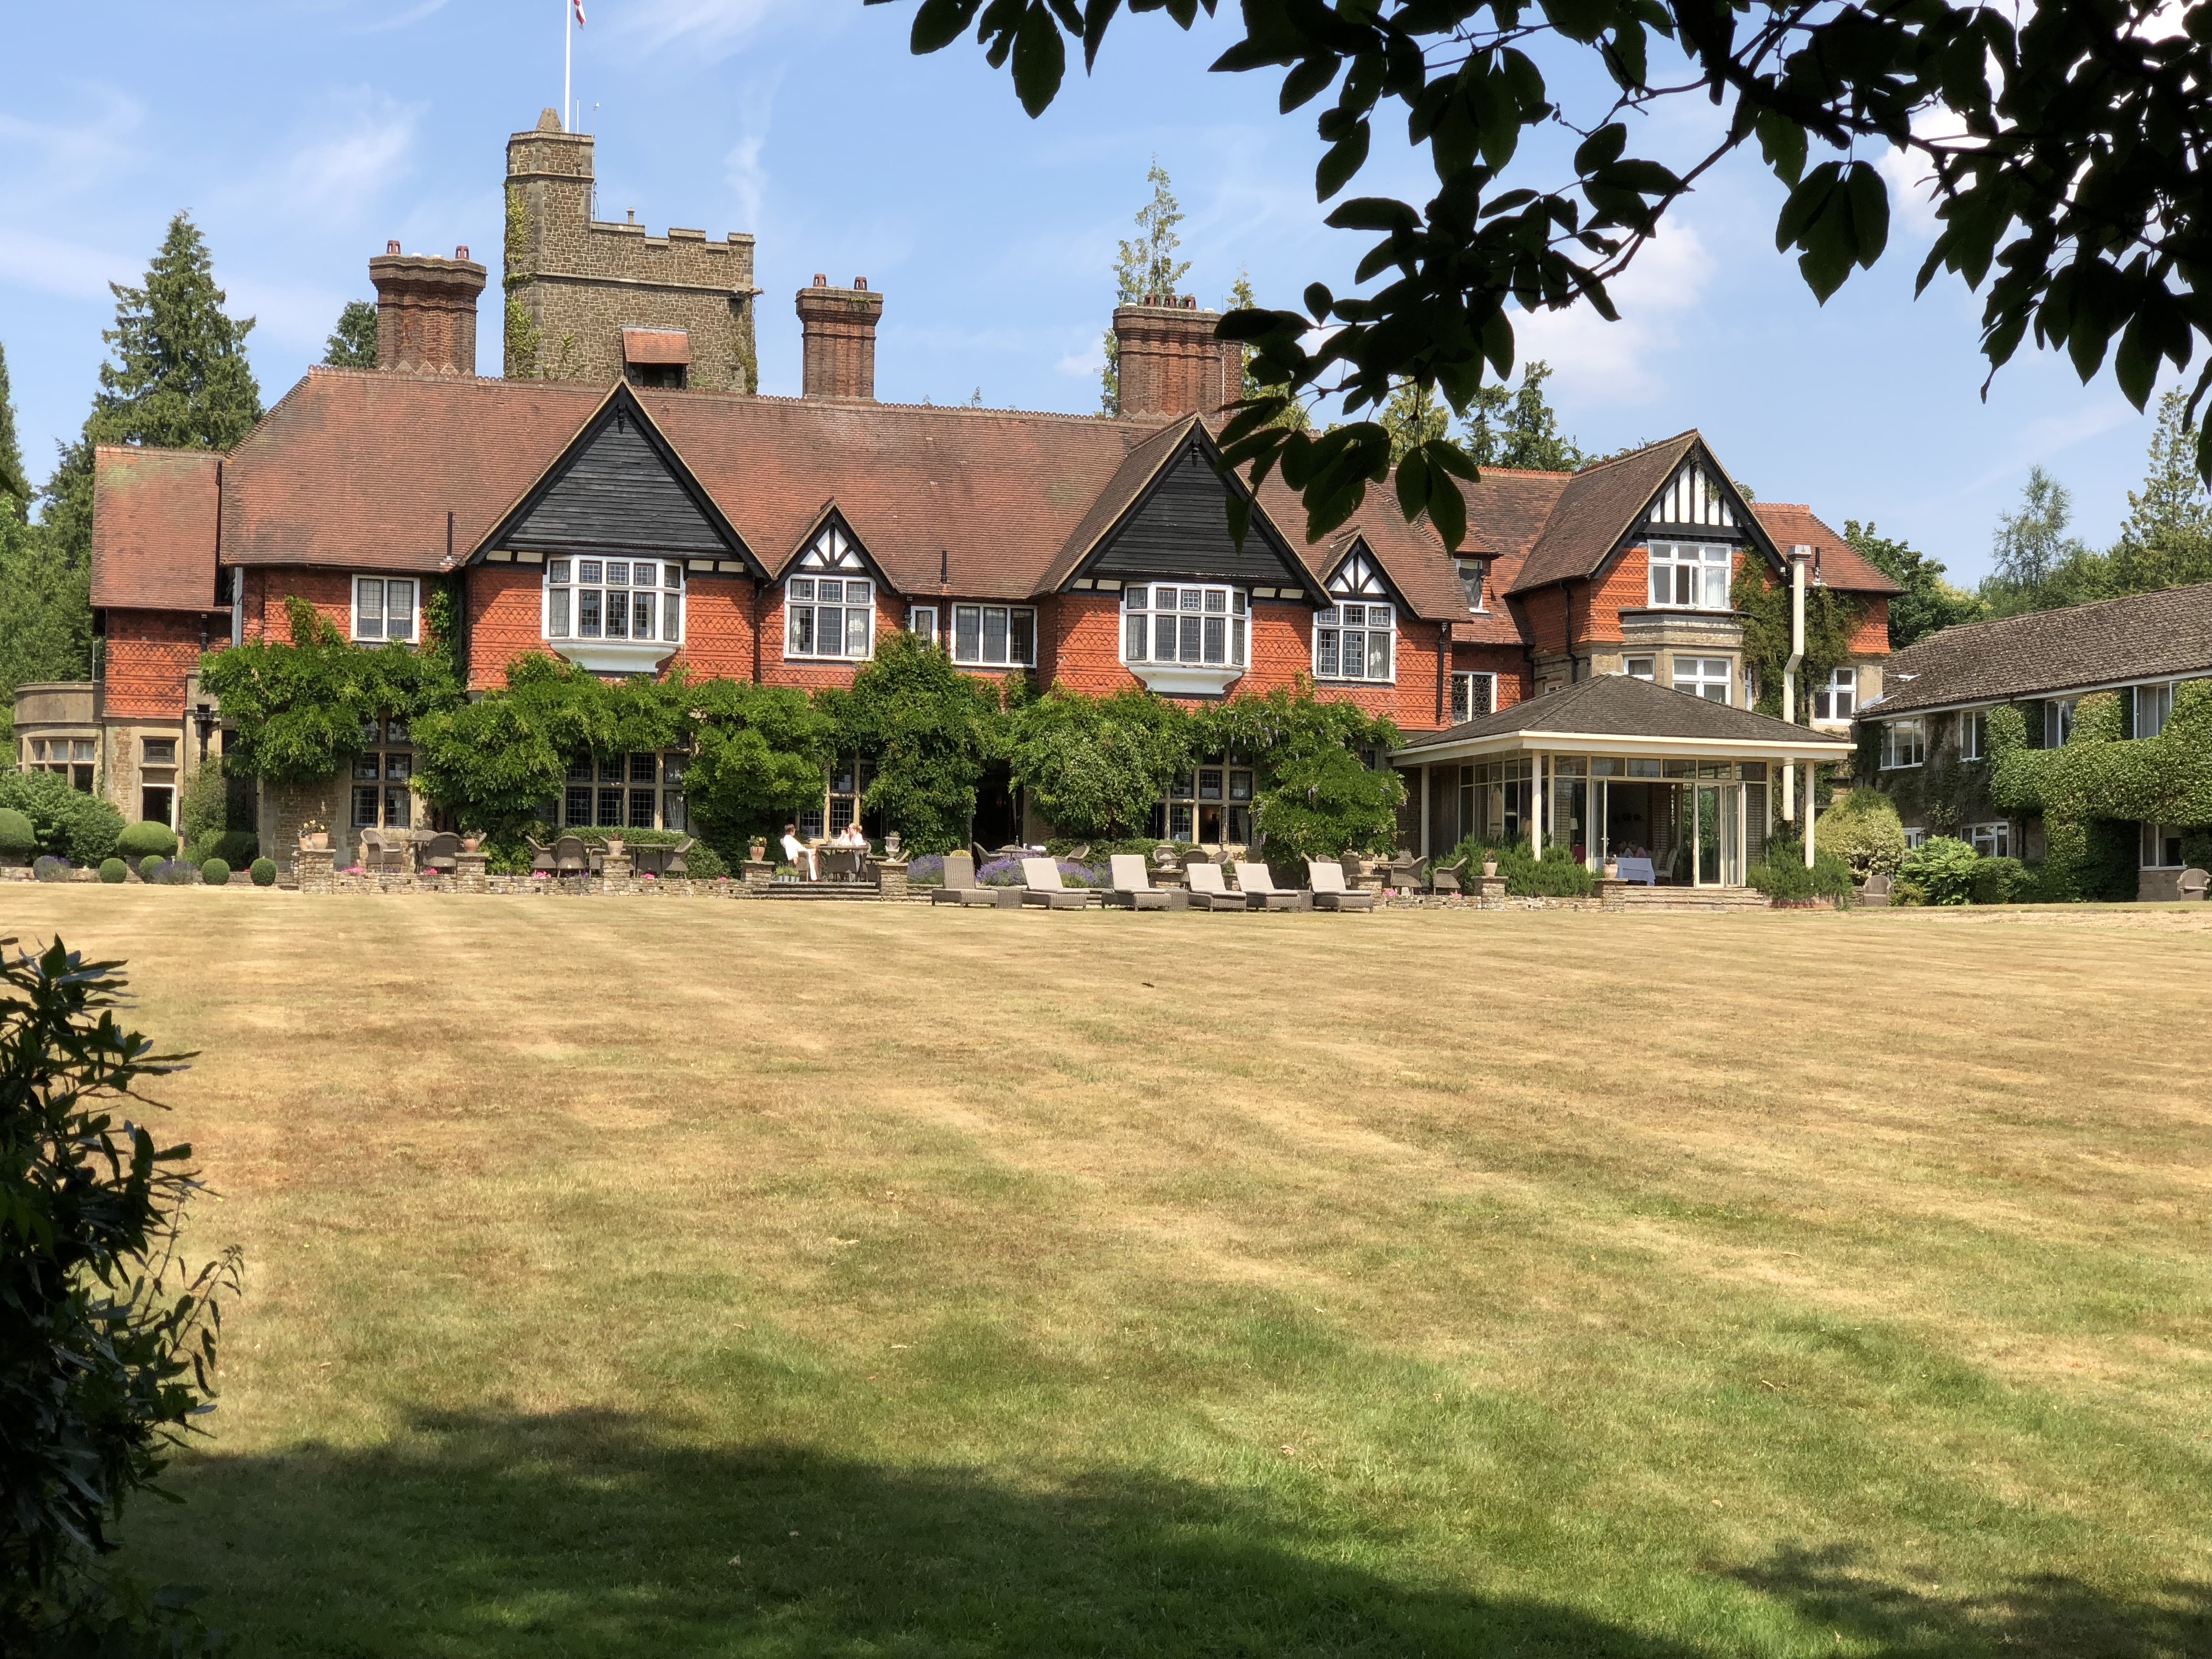 Grayshott Spa in Surrey - main house - picture from my review